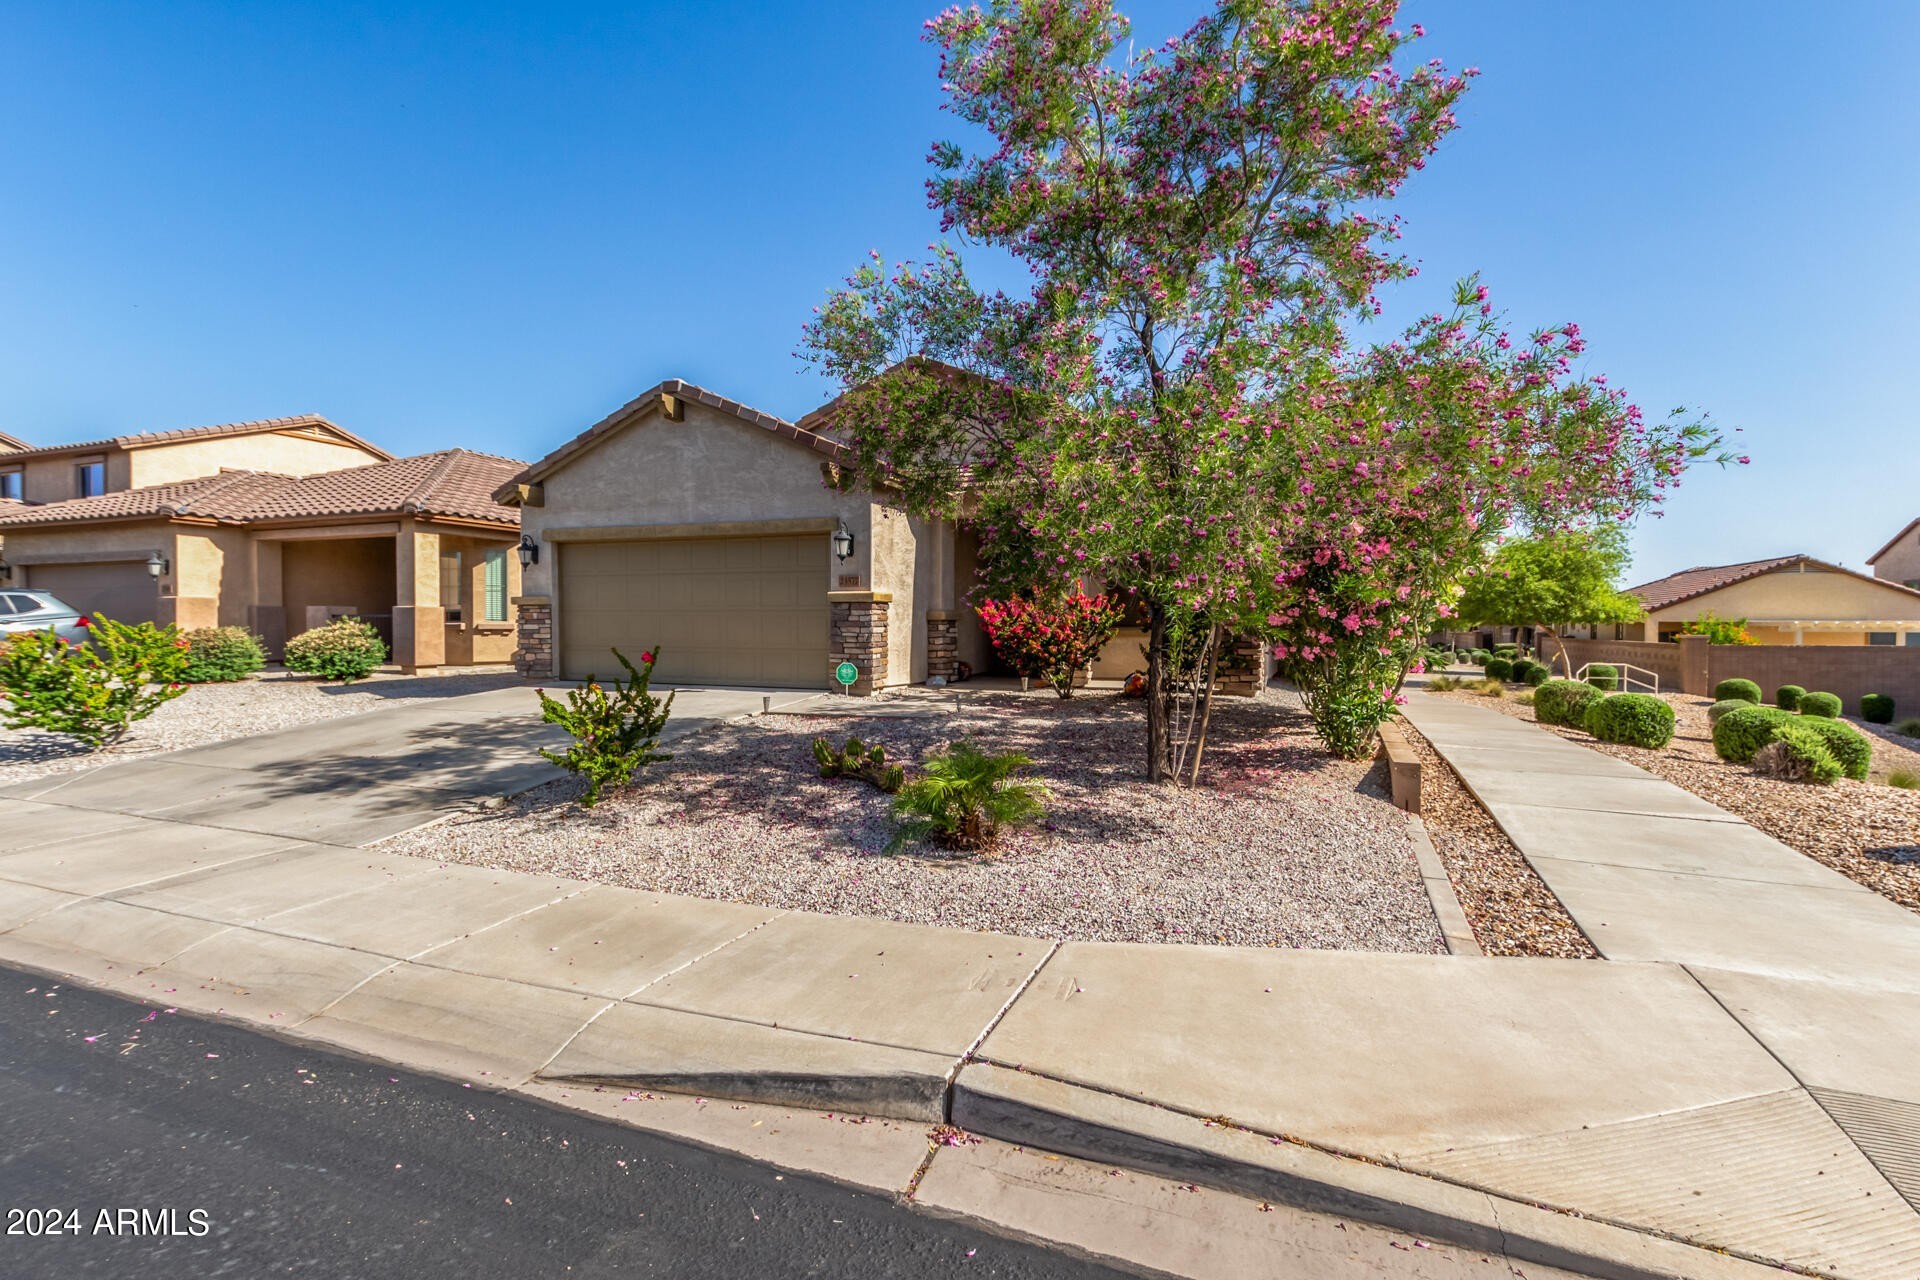 2. 23577 W Mohave Street